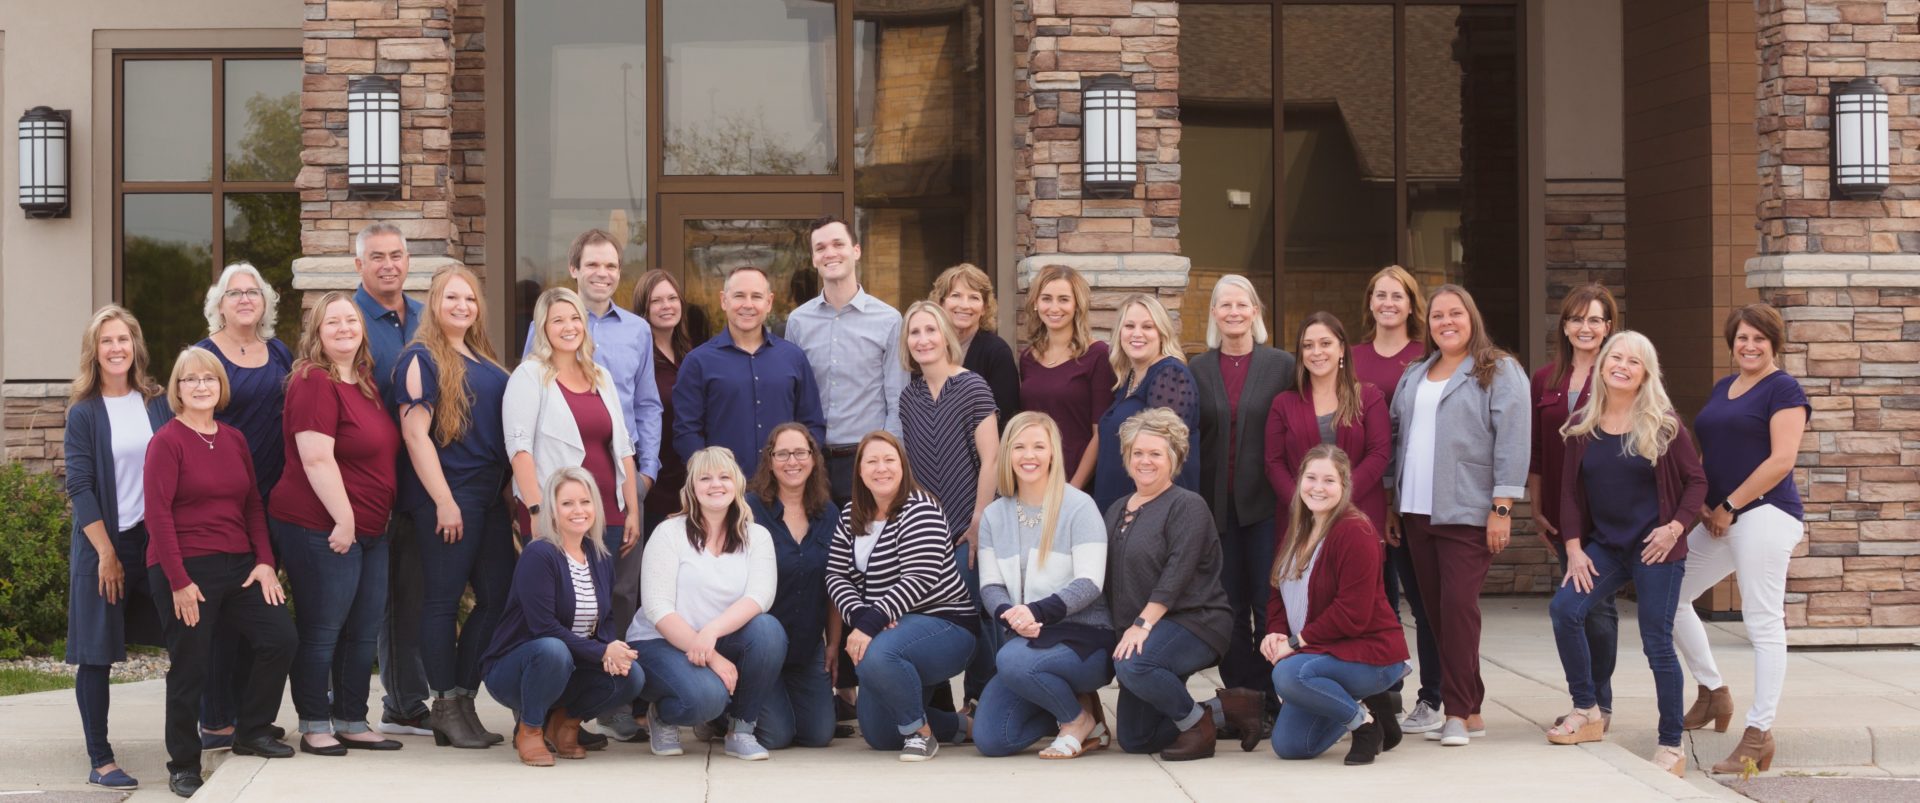 Group photo of the Southern Minnesota Orthodontics team outside their practice.